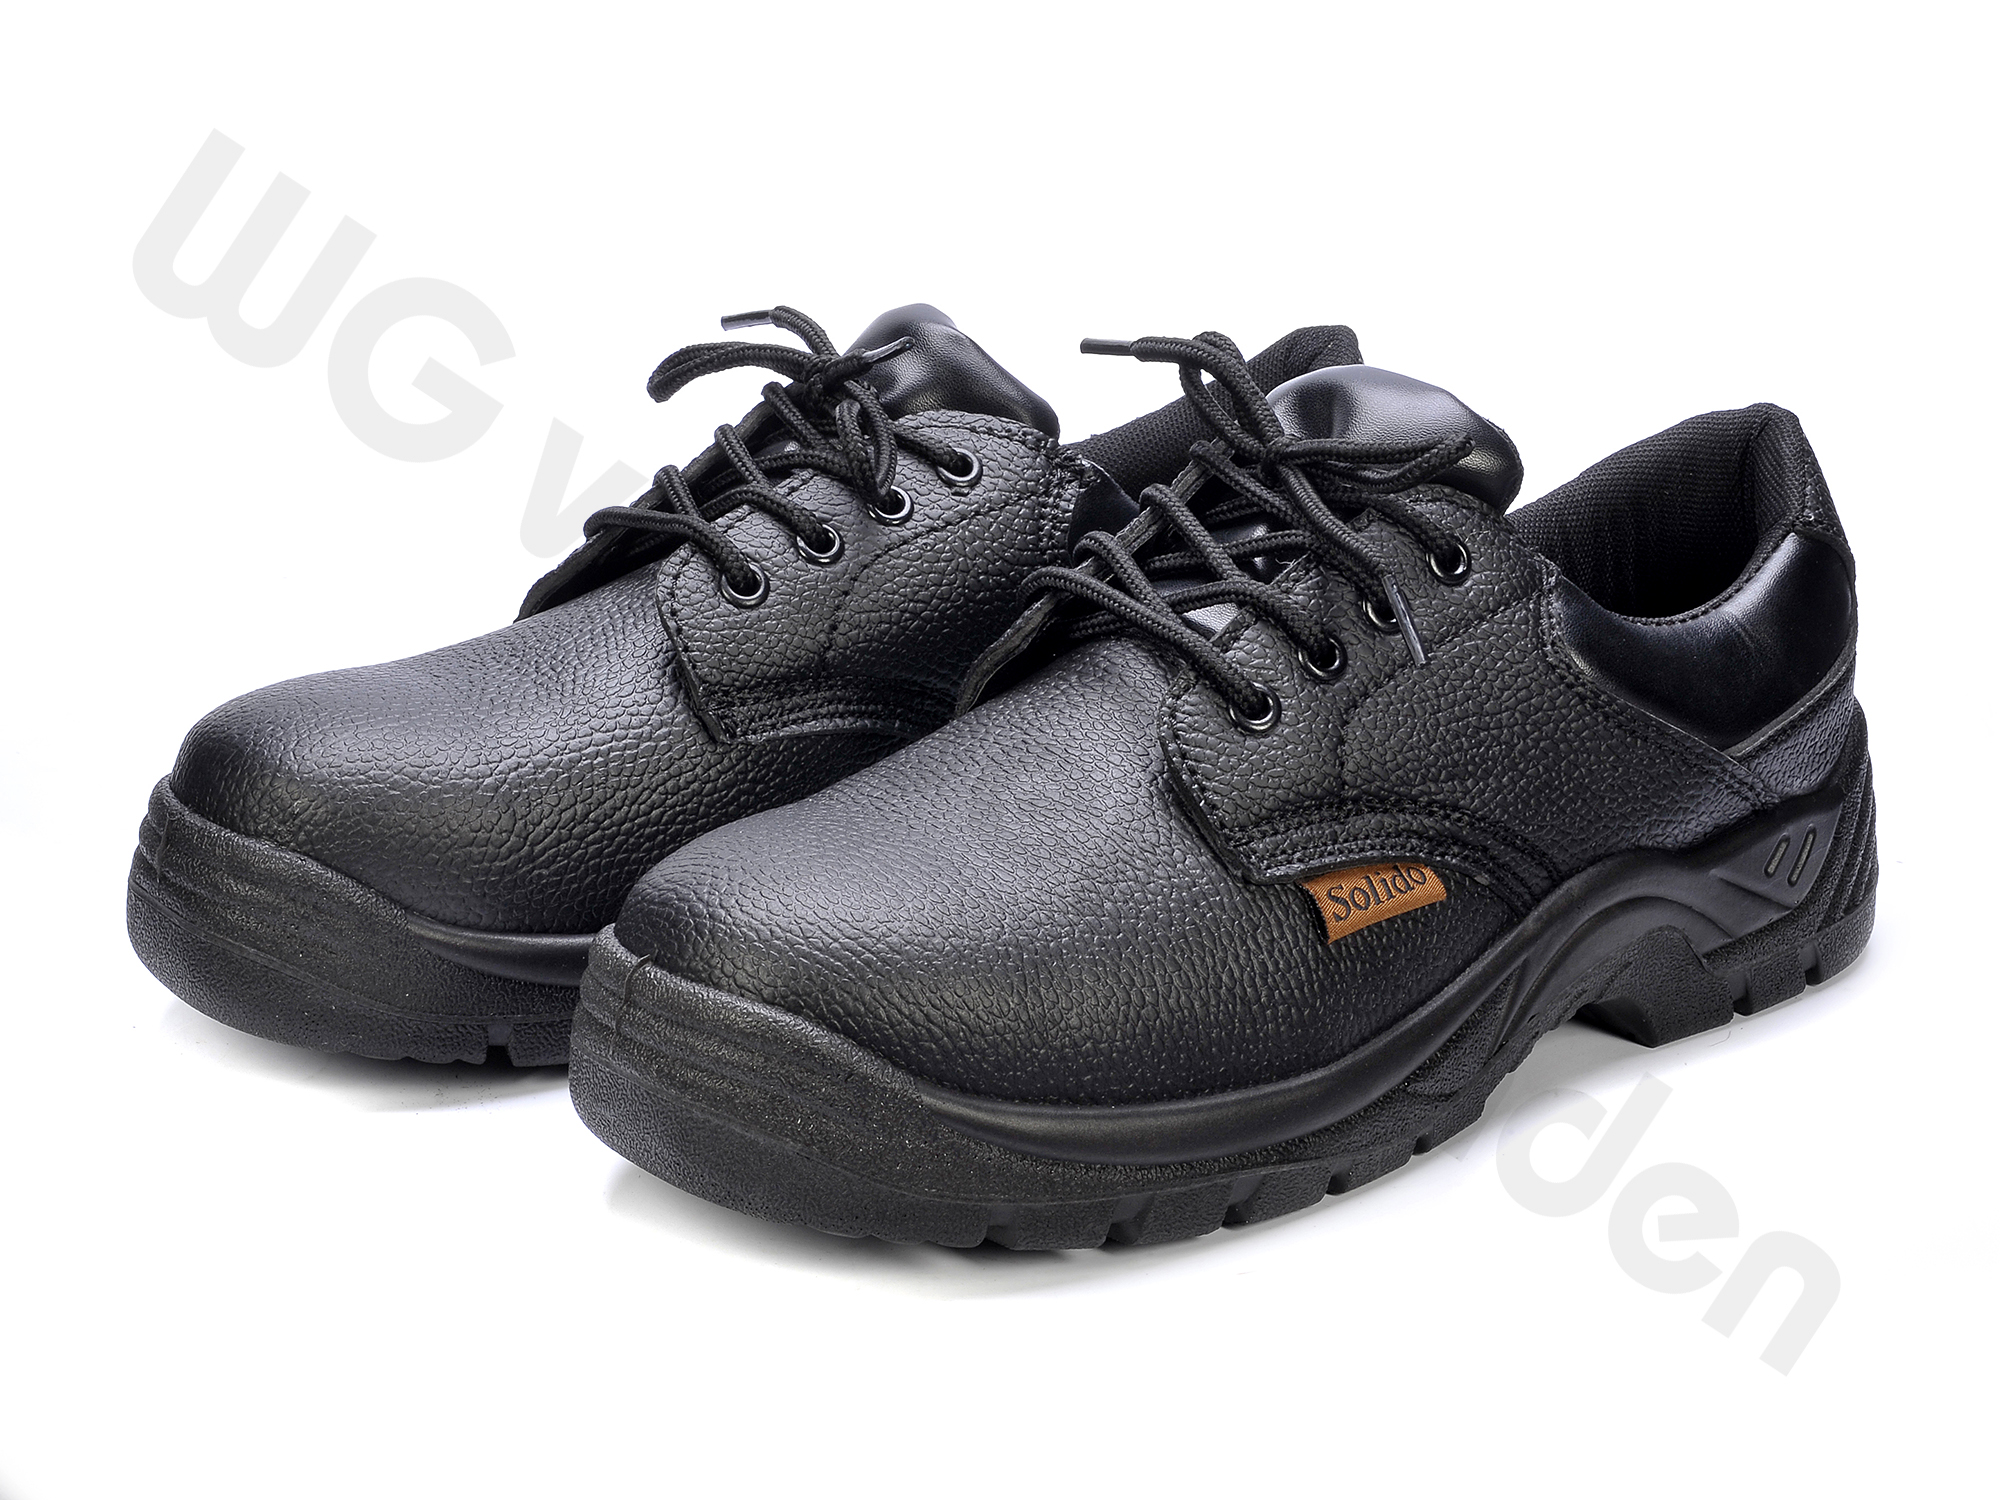 880602 SHOES SAFETY S1 WITH STEEL TOE SIZE 39 / 25.5CM CE